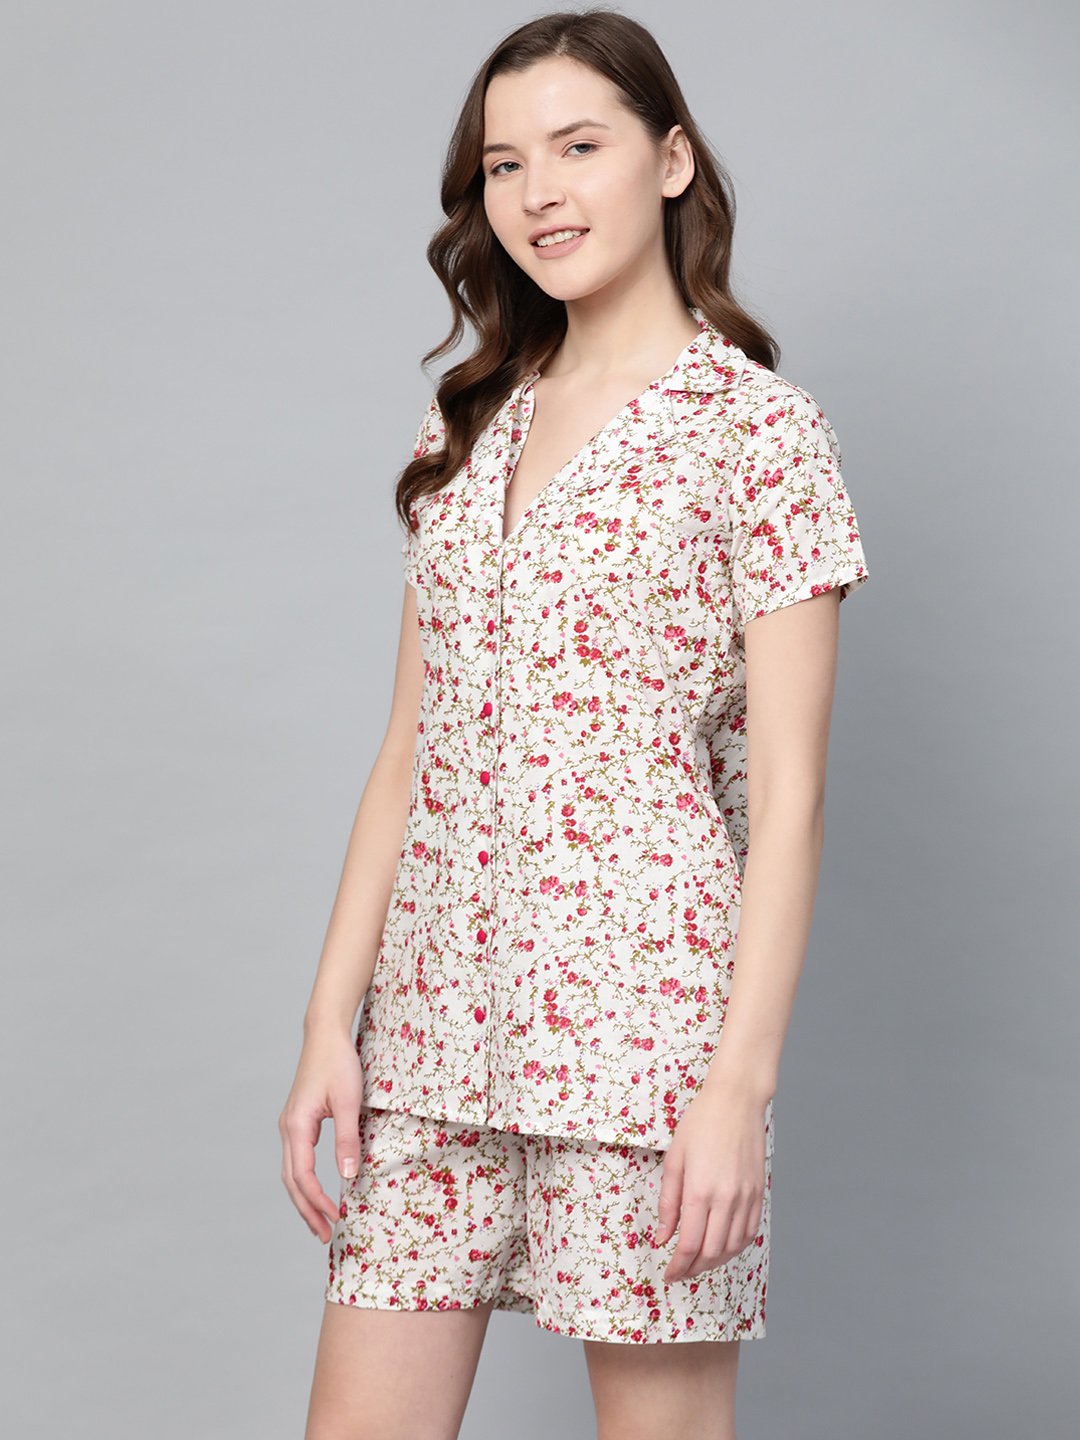 Women's White Floral Printed Night Suit - Nayo Clothing